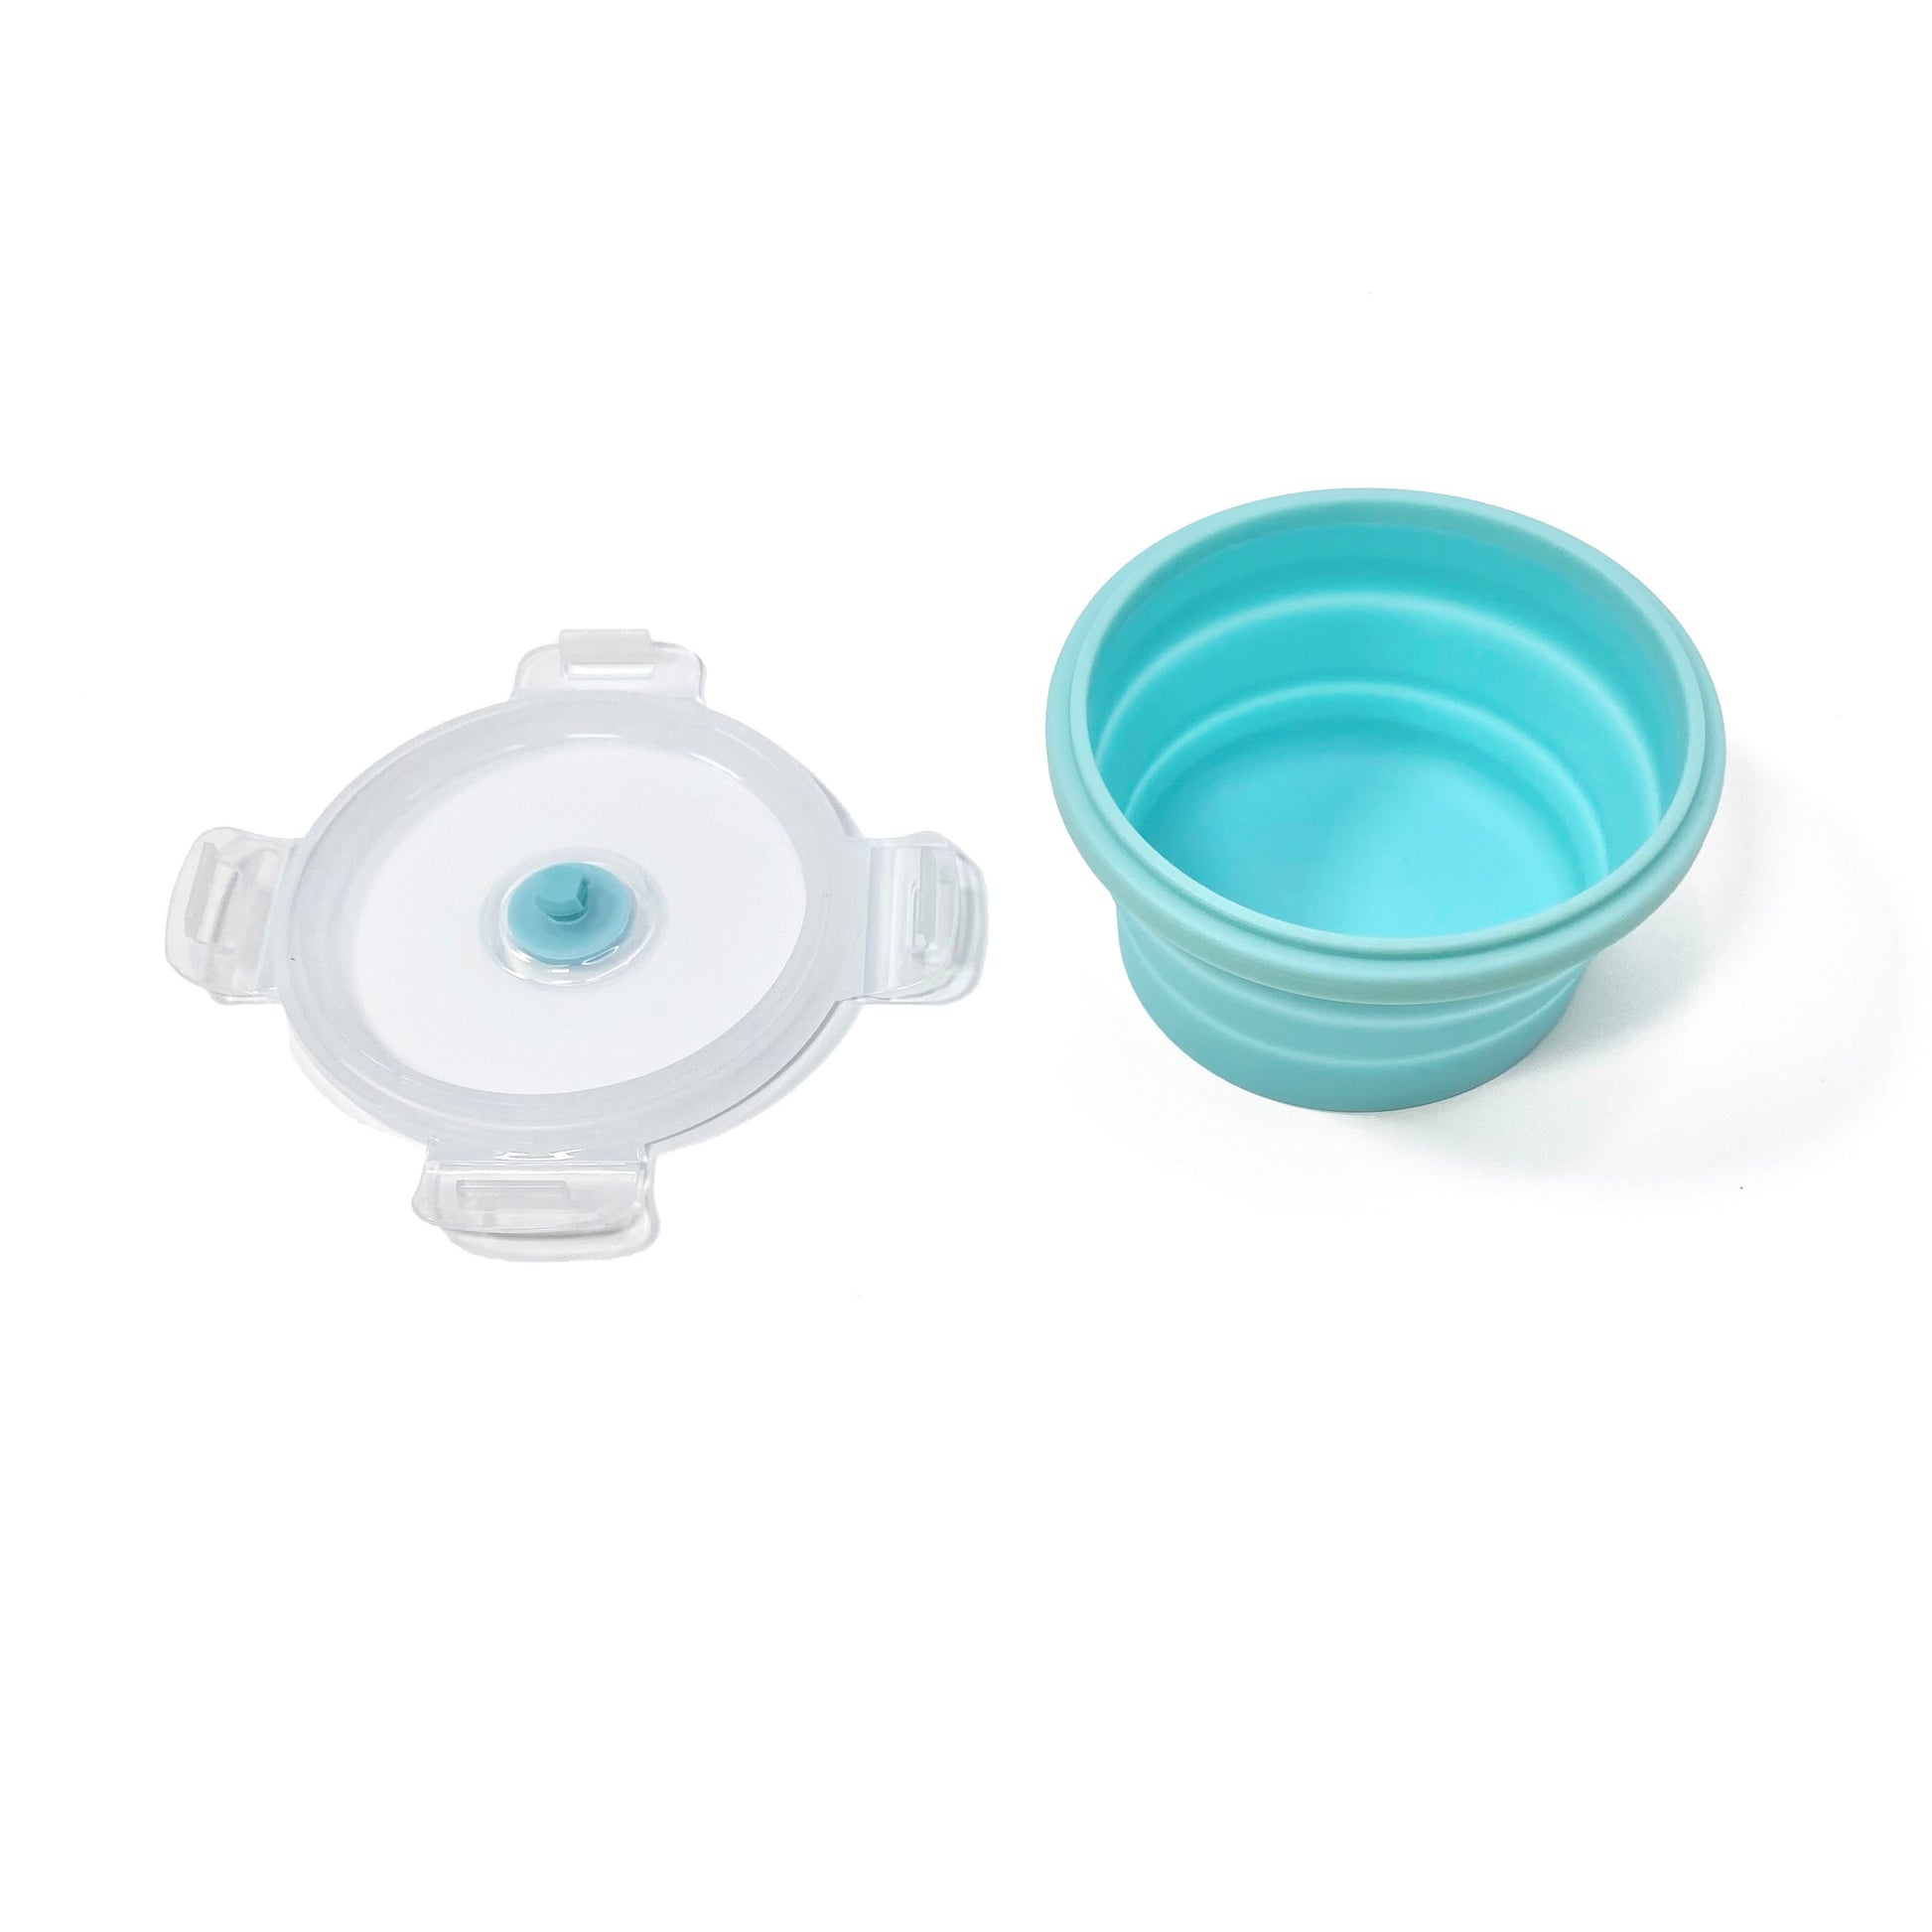 A collapsible blue circular silicone food storage tub with lid. Side view with the tub fully expanded and the lid removed.